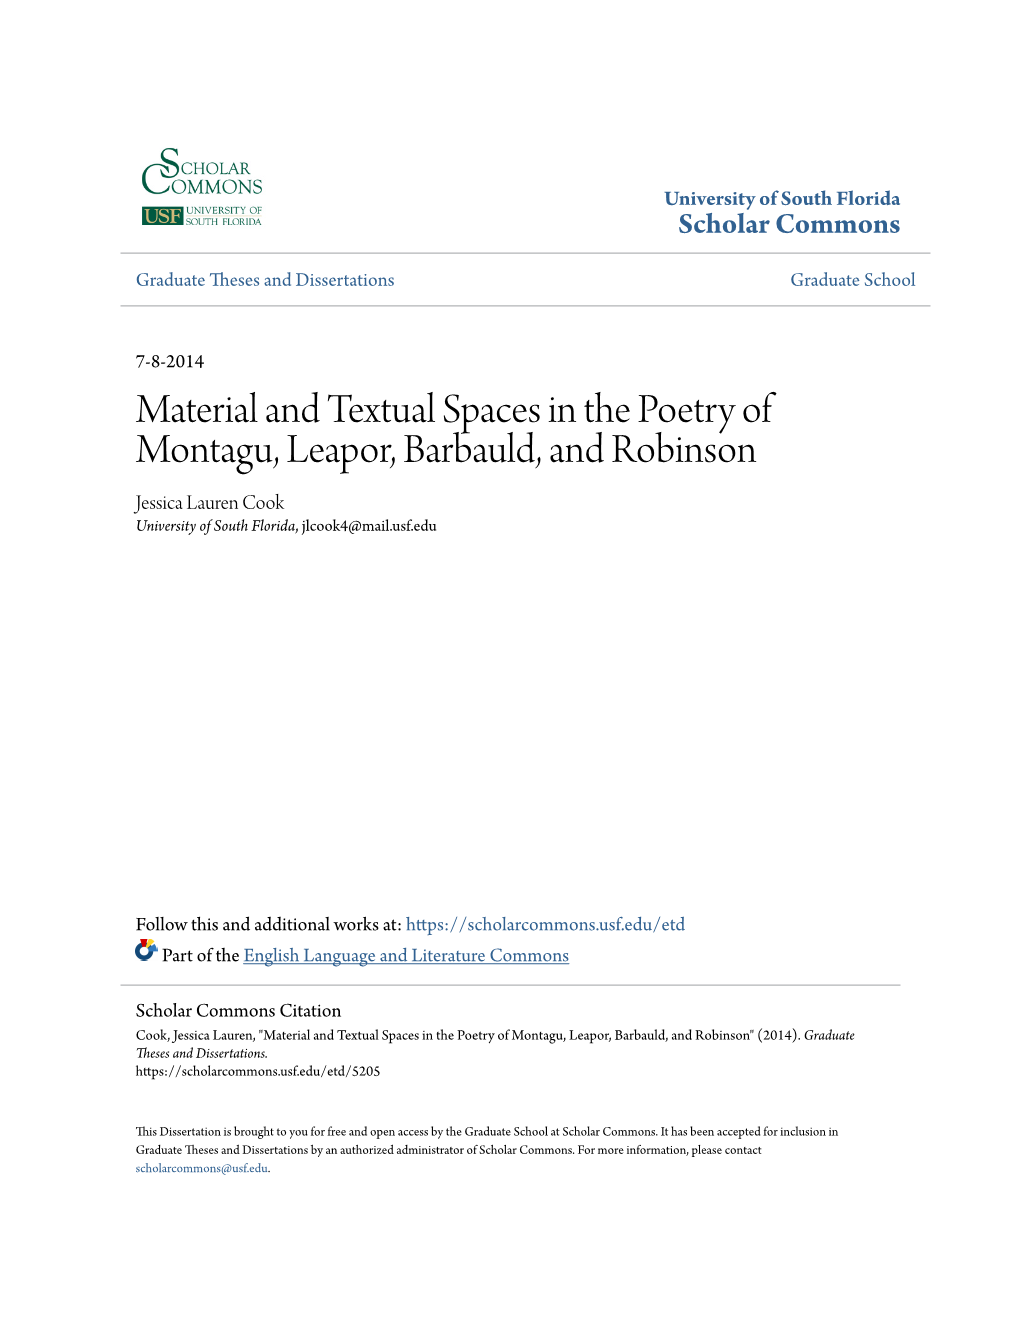 Material and Textual Spaces in the Poetry of Montagu, Leapor, Barbauld, and Robinson Jessica Lauren Cook University of South Florida, Jlcook4@Mail.Usf.Edu